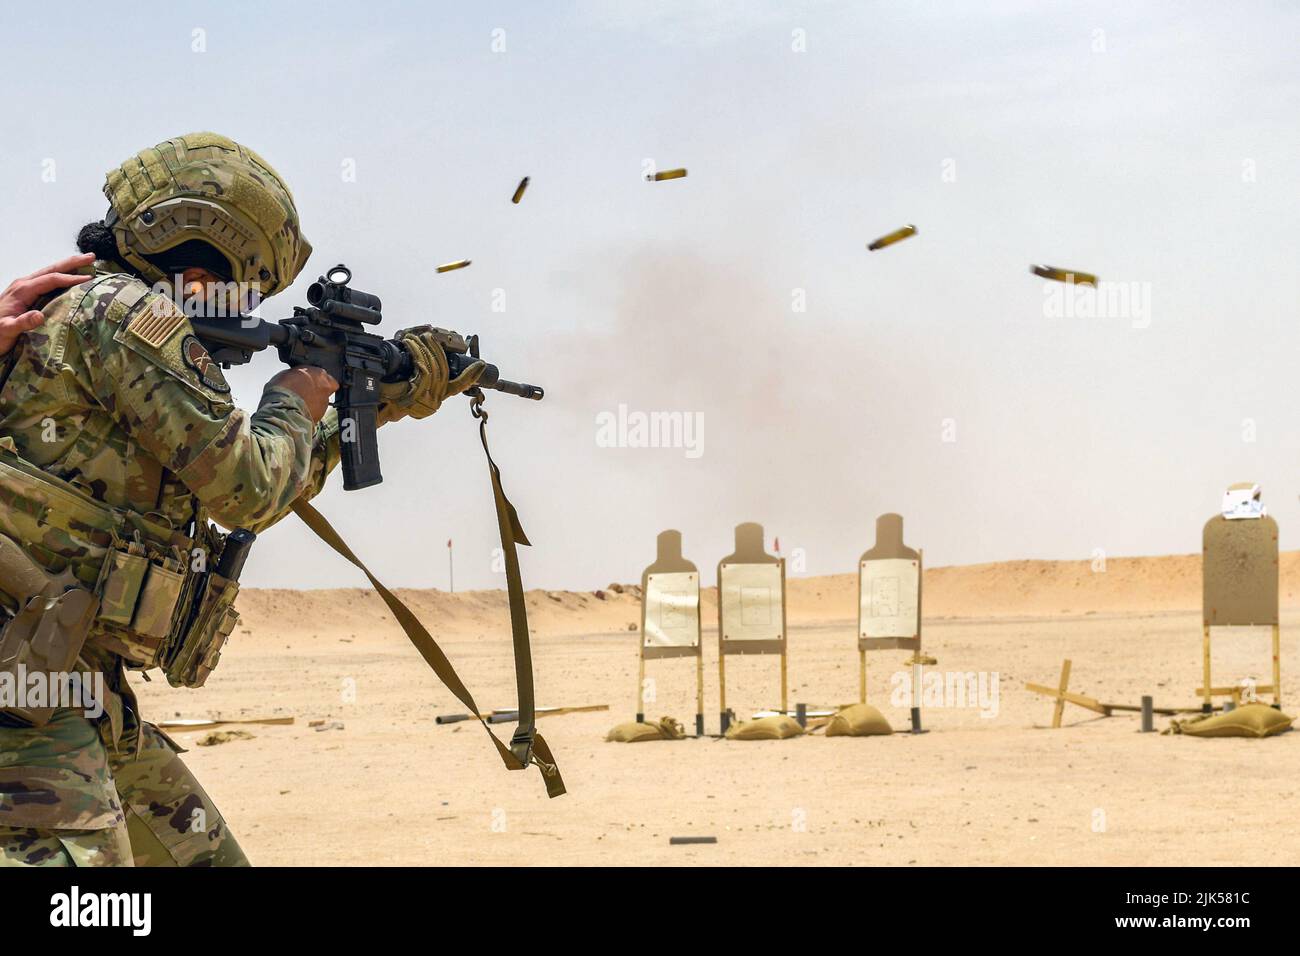 Prince Sultan Air Base, Saudi Arabia. 8th July, 2022. U.S. Air Force Master Sgt. Kourtney Haggins, 378th Expeditionary Security Forces Squadron first sergeant, fires an M4 carbine on full auto at Prince Sultan Air Base's firing range, Kingdom of Saudi Arabia, July 8, 2022. The 378th ESFS invited the 378th Air Expeditionary Wing leadership out to see some of the squadron's equipment and feel its capabilities firsthand. Credit: U.S. Air Force/ZUMA Press Wire Service/ZUMAPRESS.com/Alamy Live News Stock Photo